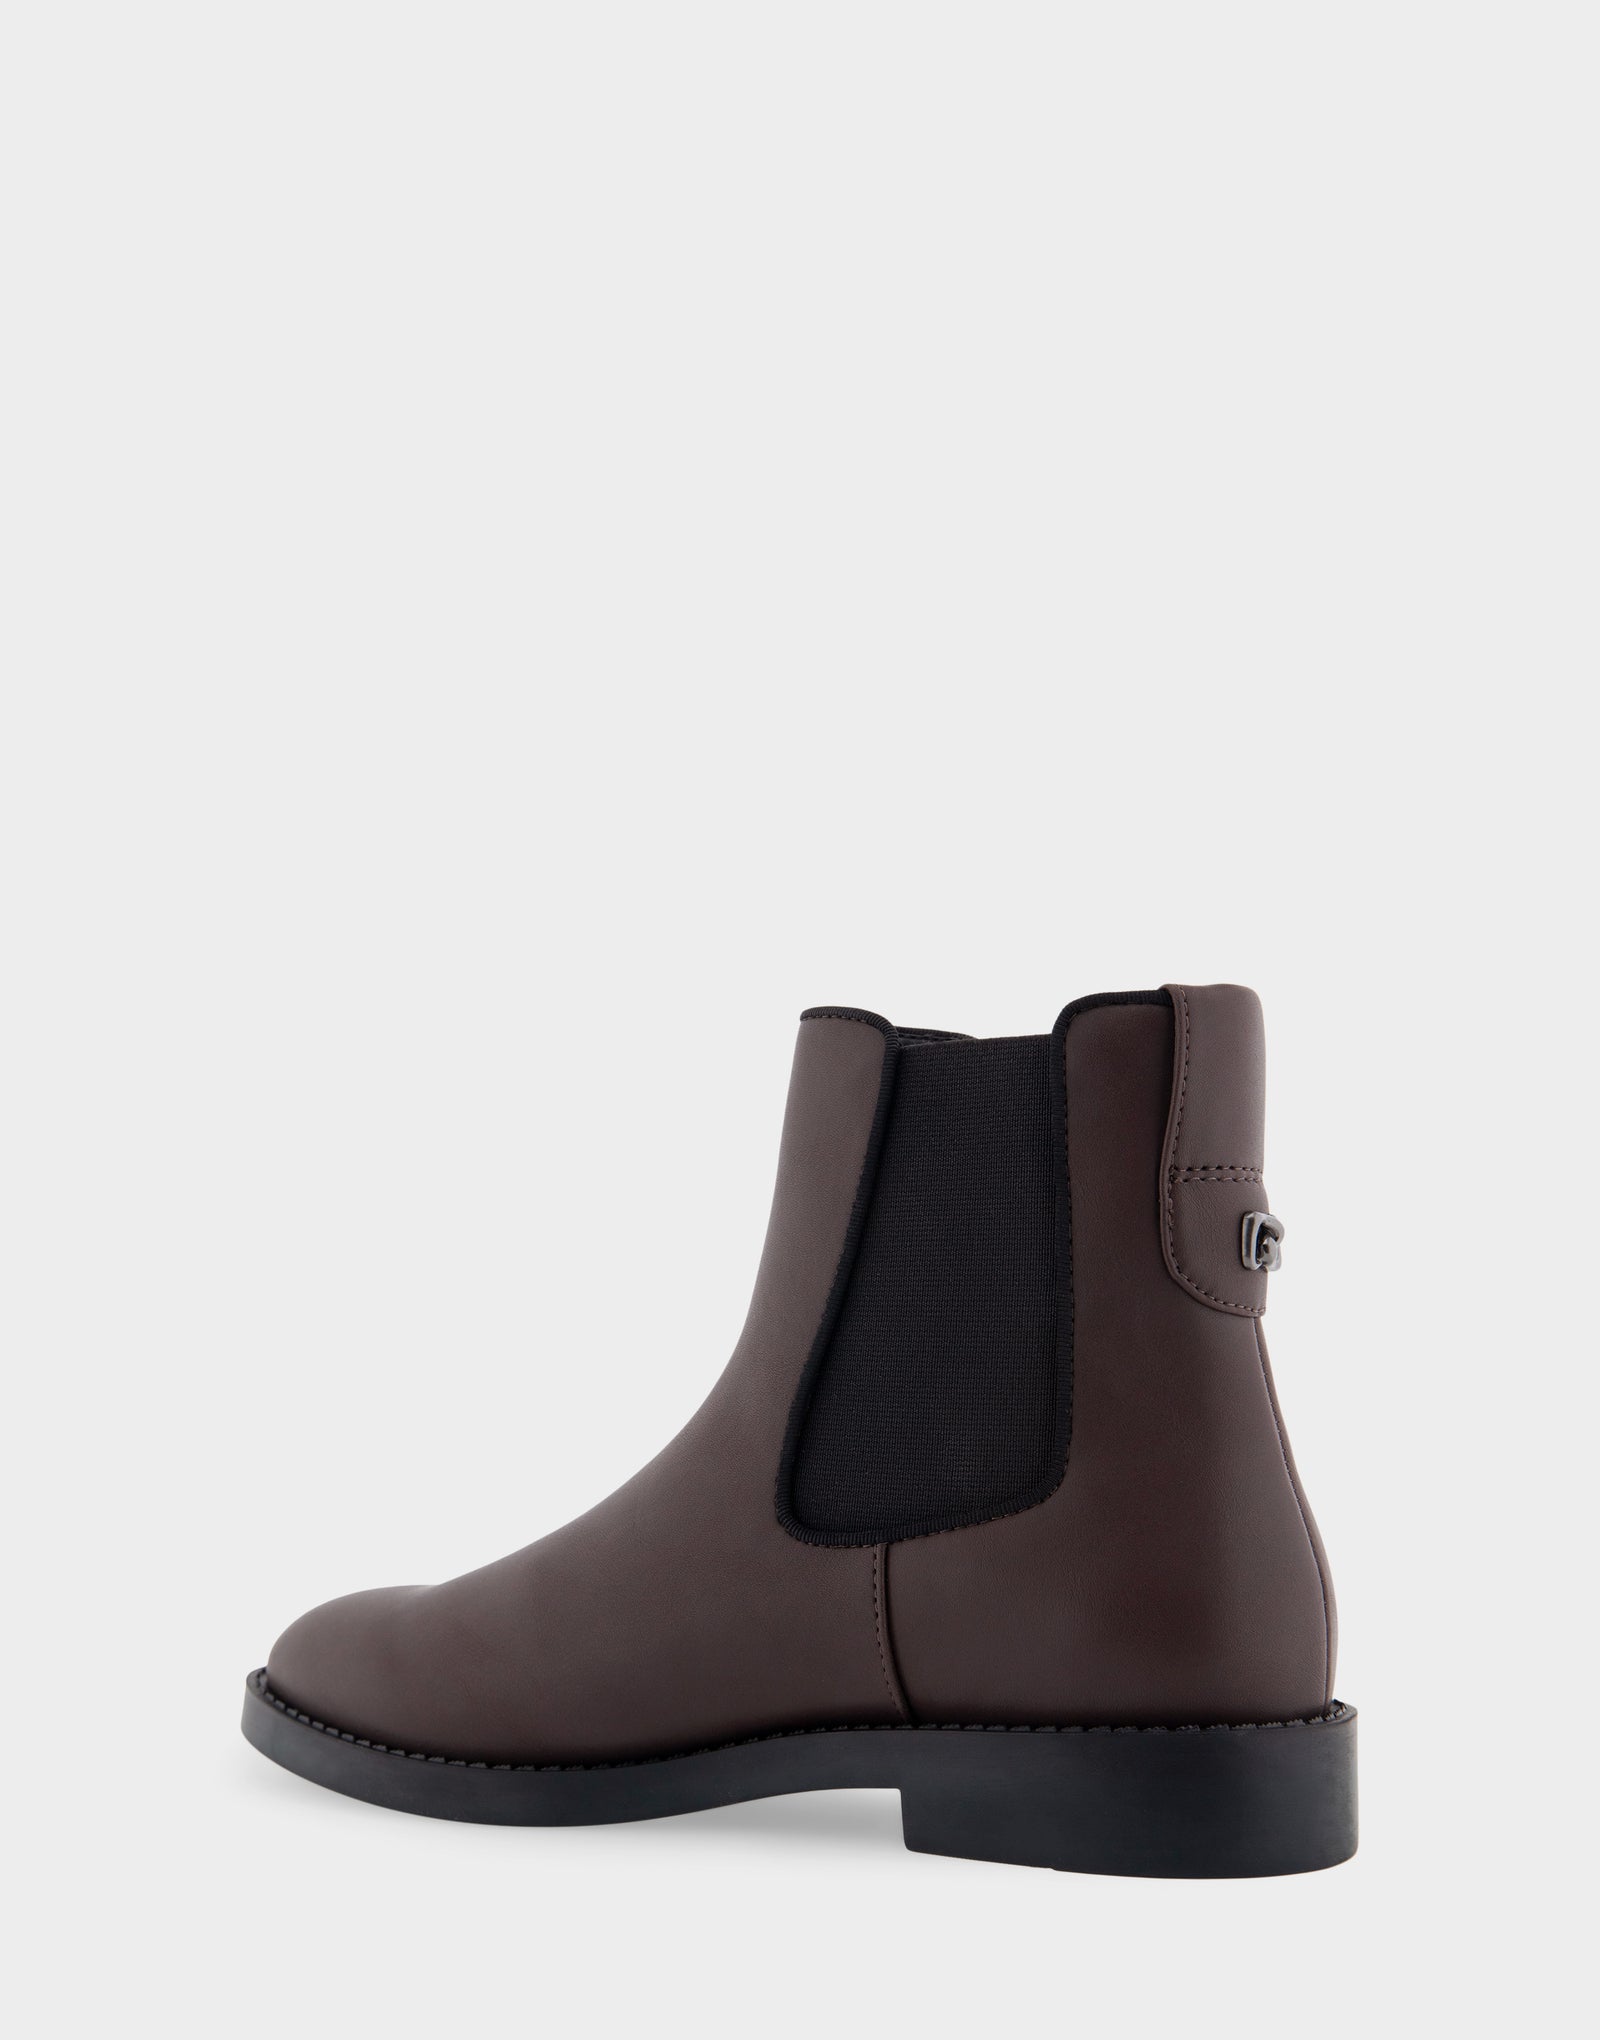 Women's Ankle Boot in Brown